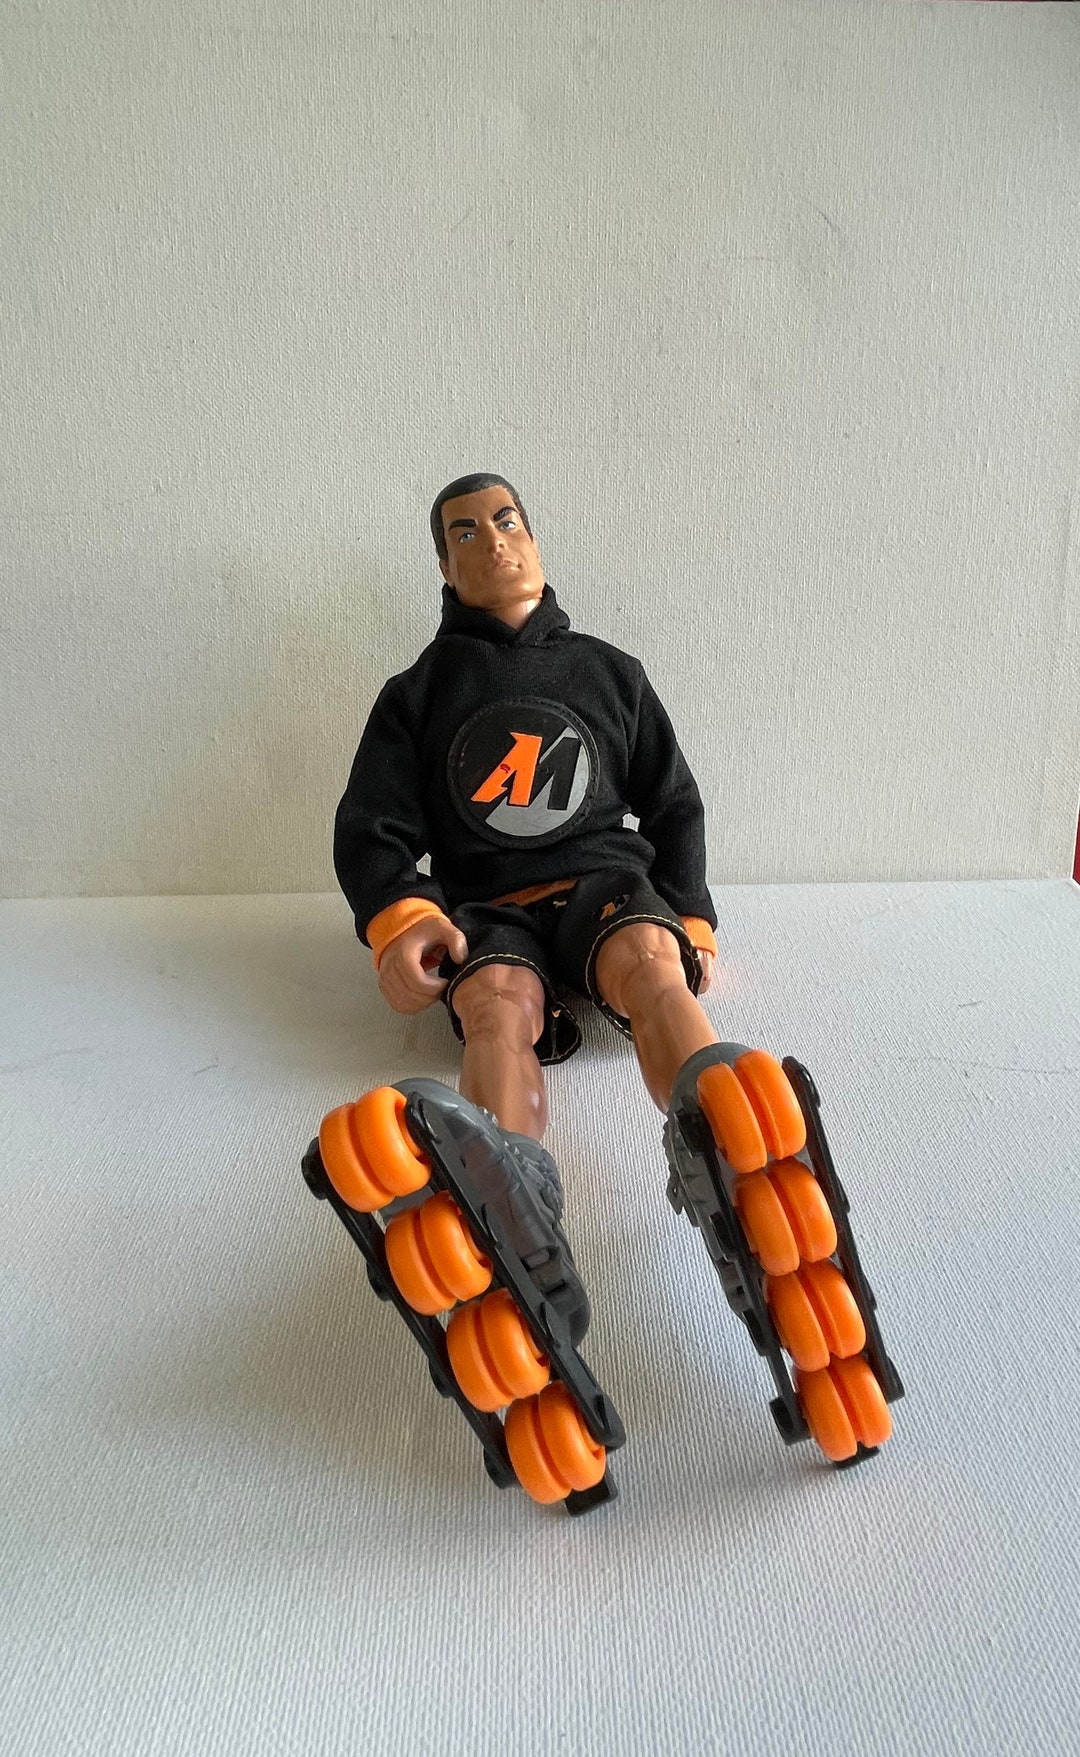 Samengesteld Afgeschaft jukbeen 1994 Hasbro Action Man fully pose able figure toy doll with - Etsy Nederland